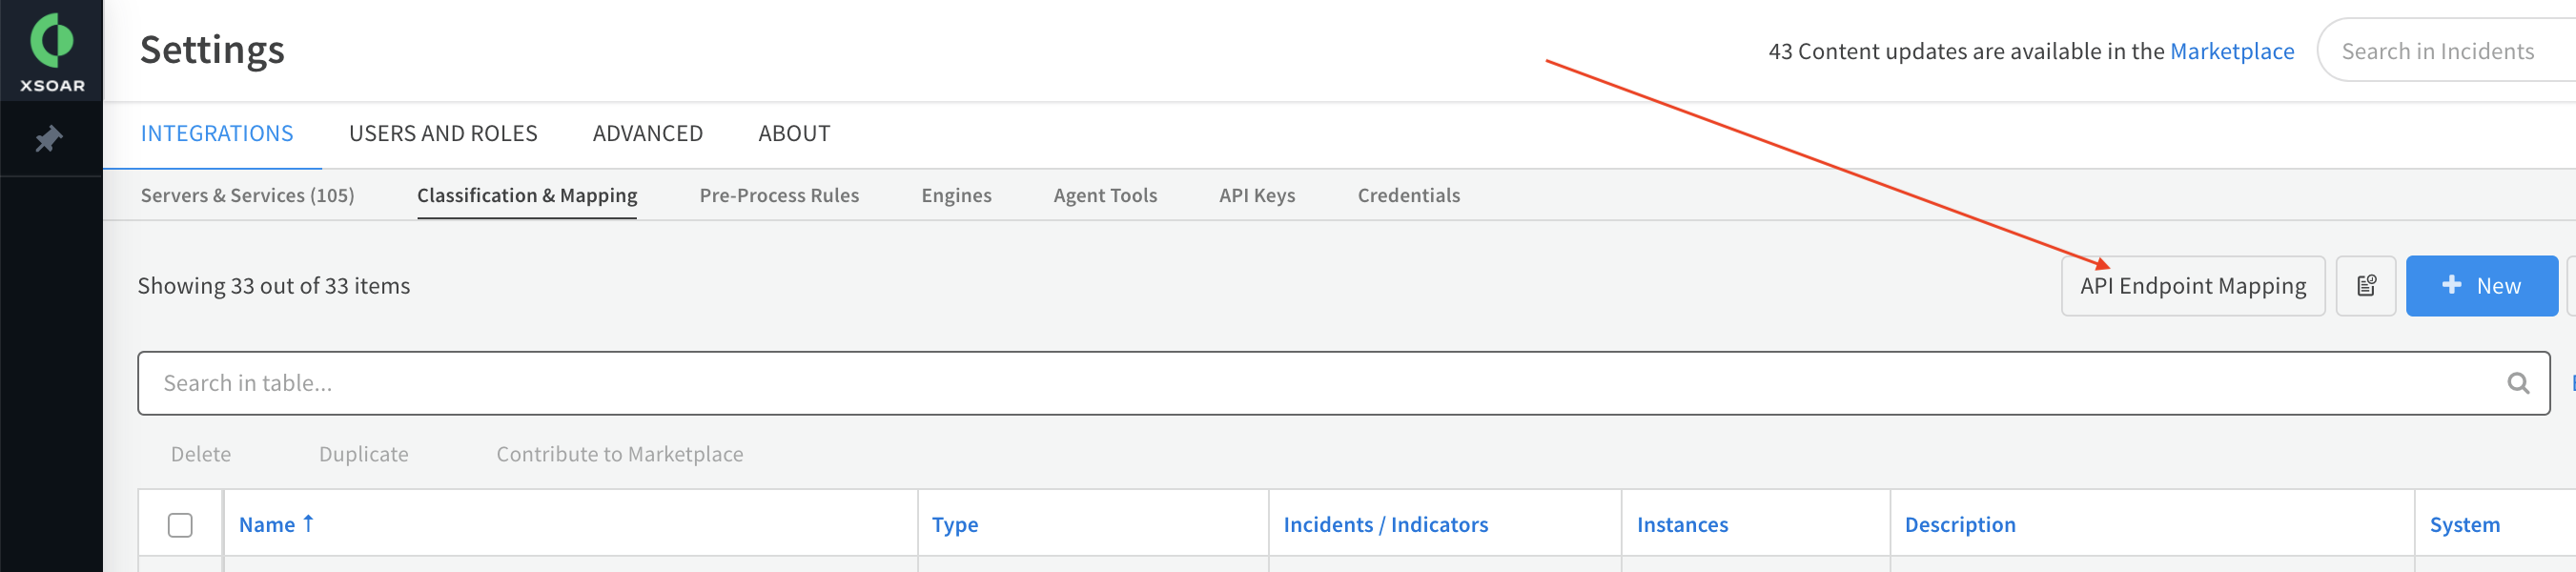 API Endpoint Mapping Button